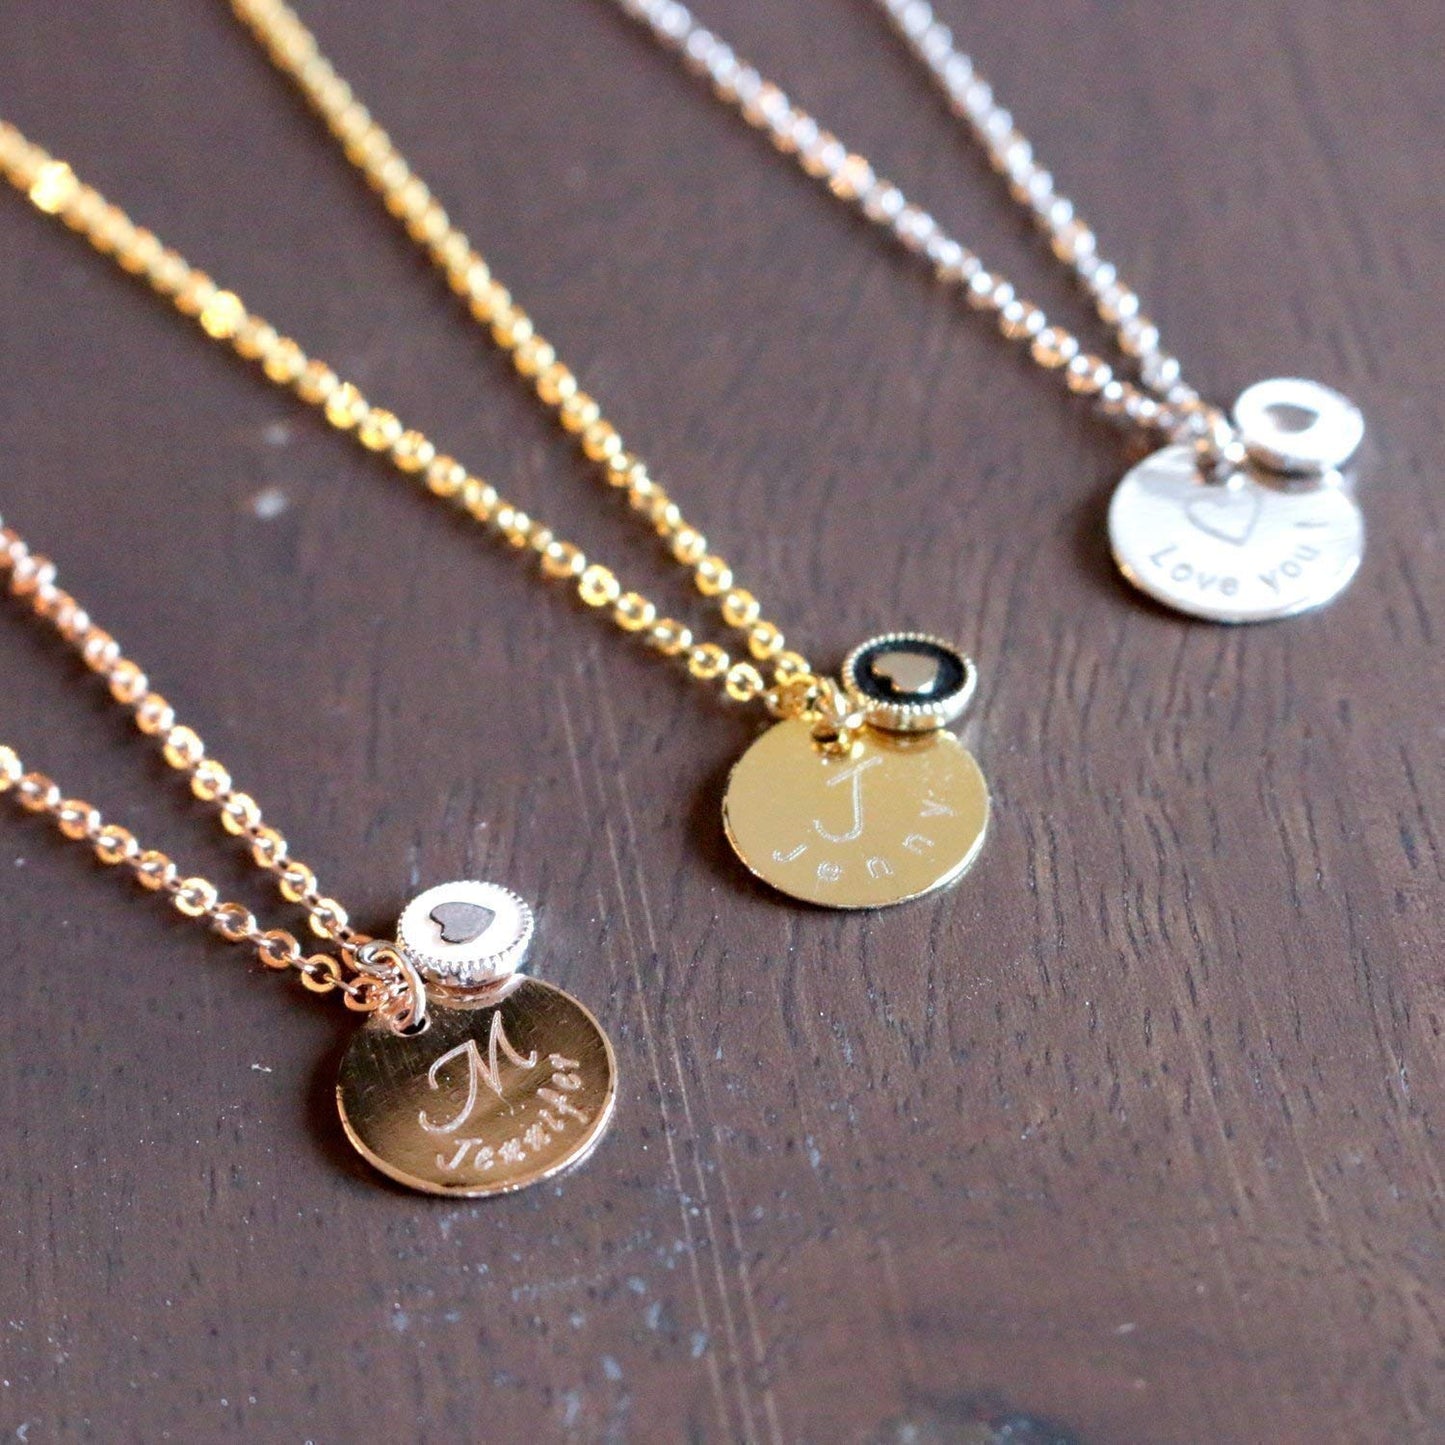 Buy Personalized Coin Disc Necklace with Heart Charm at Petite Boutique - Ideal Birthday Gift